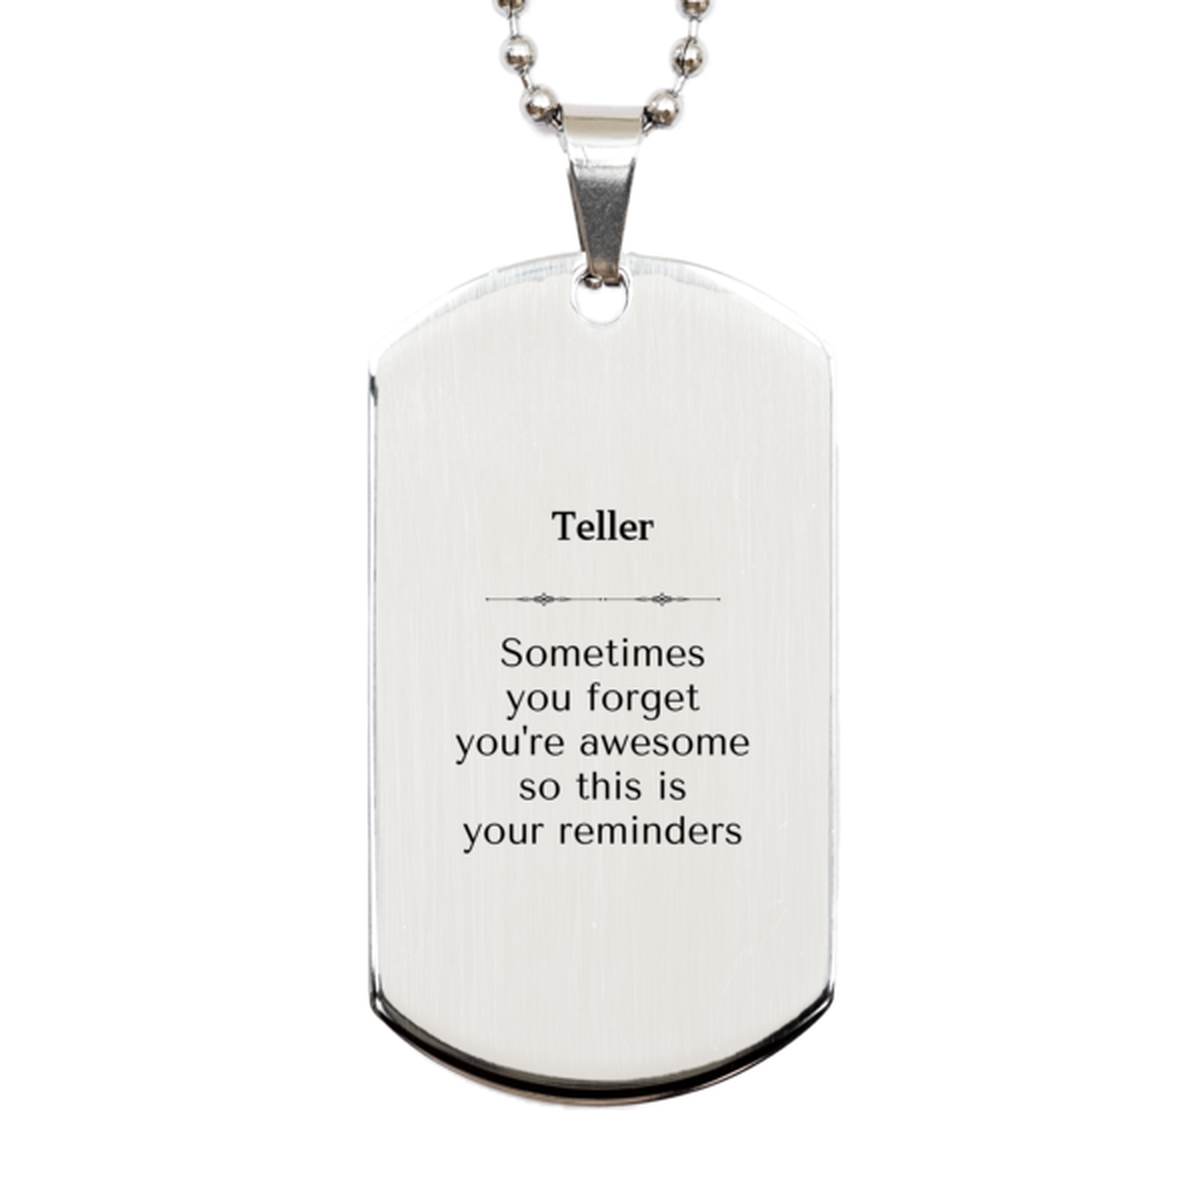 Sentimental Teller Silver Dog Tag, Teller Sometimes you forget you're awesome so this is your reminders, Graduation Christmas Birthday Gifts for Teller, Men, Women, Coworkers